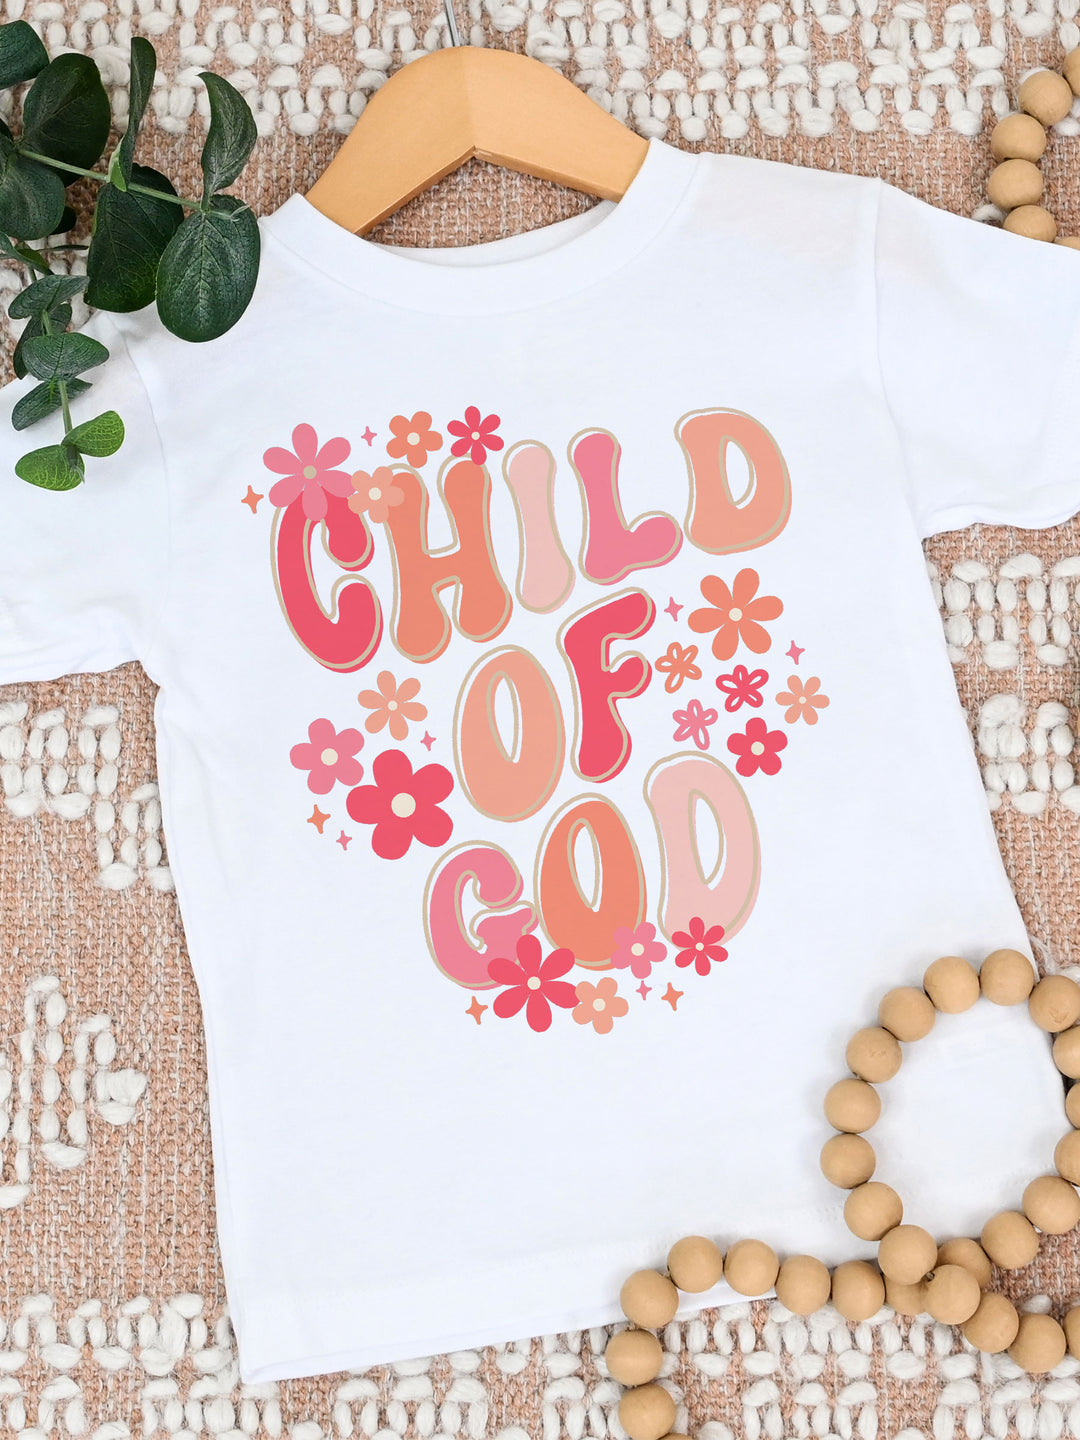 Floral Child of God Kids Graphic Tee